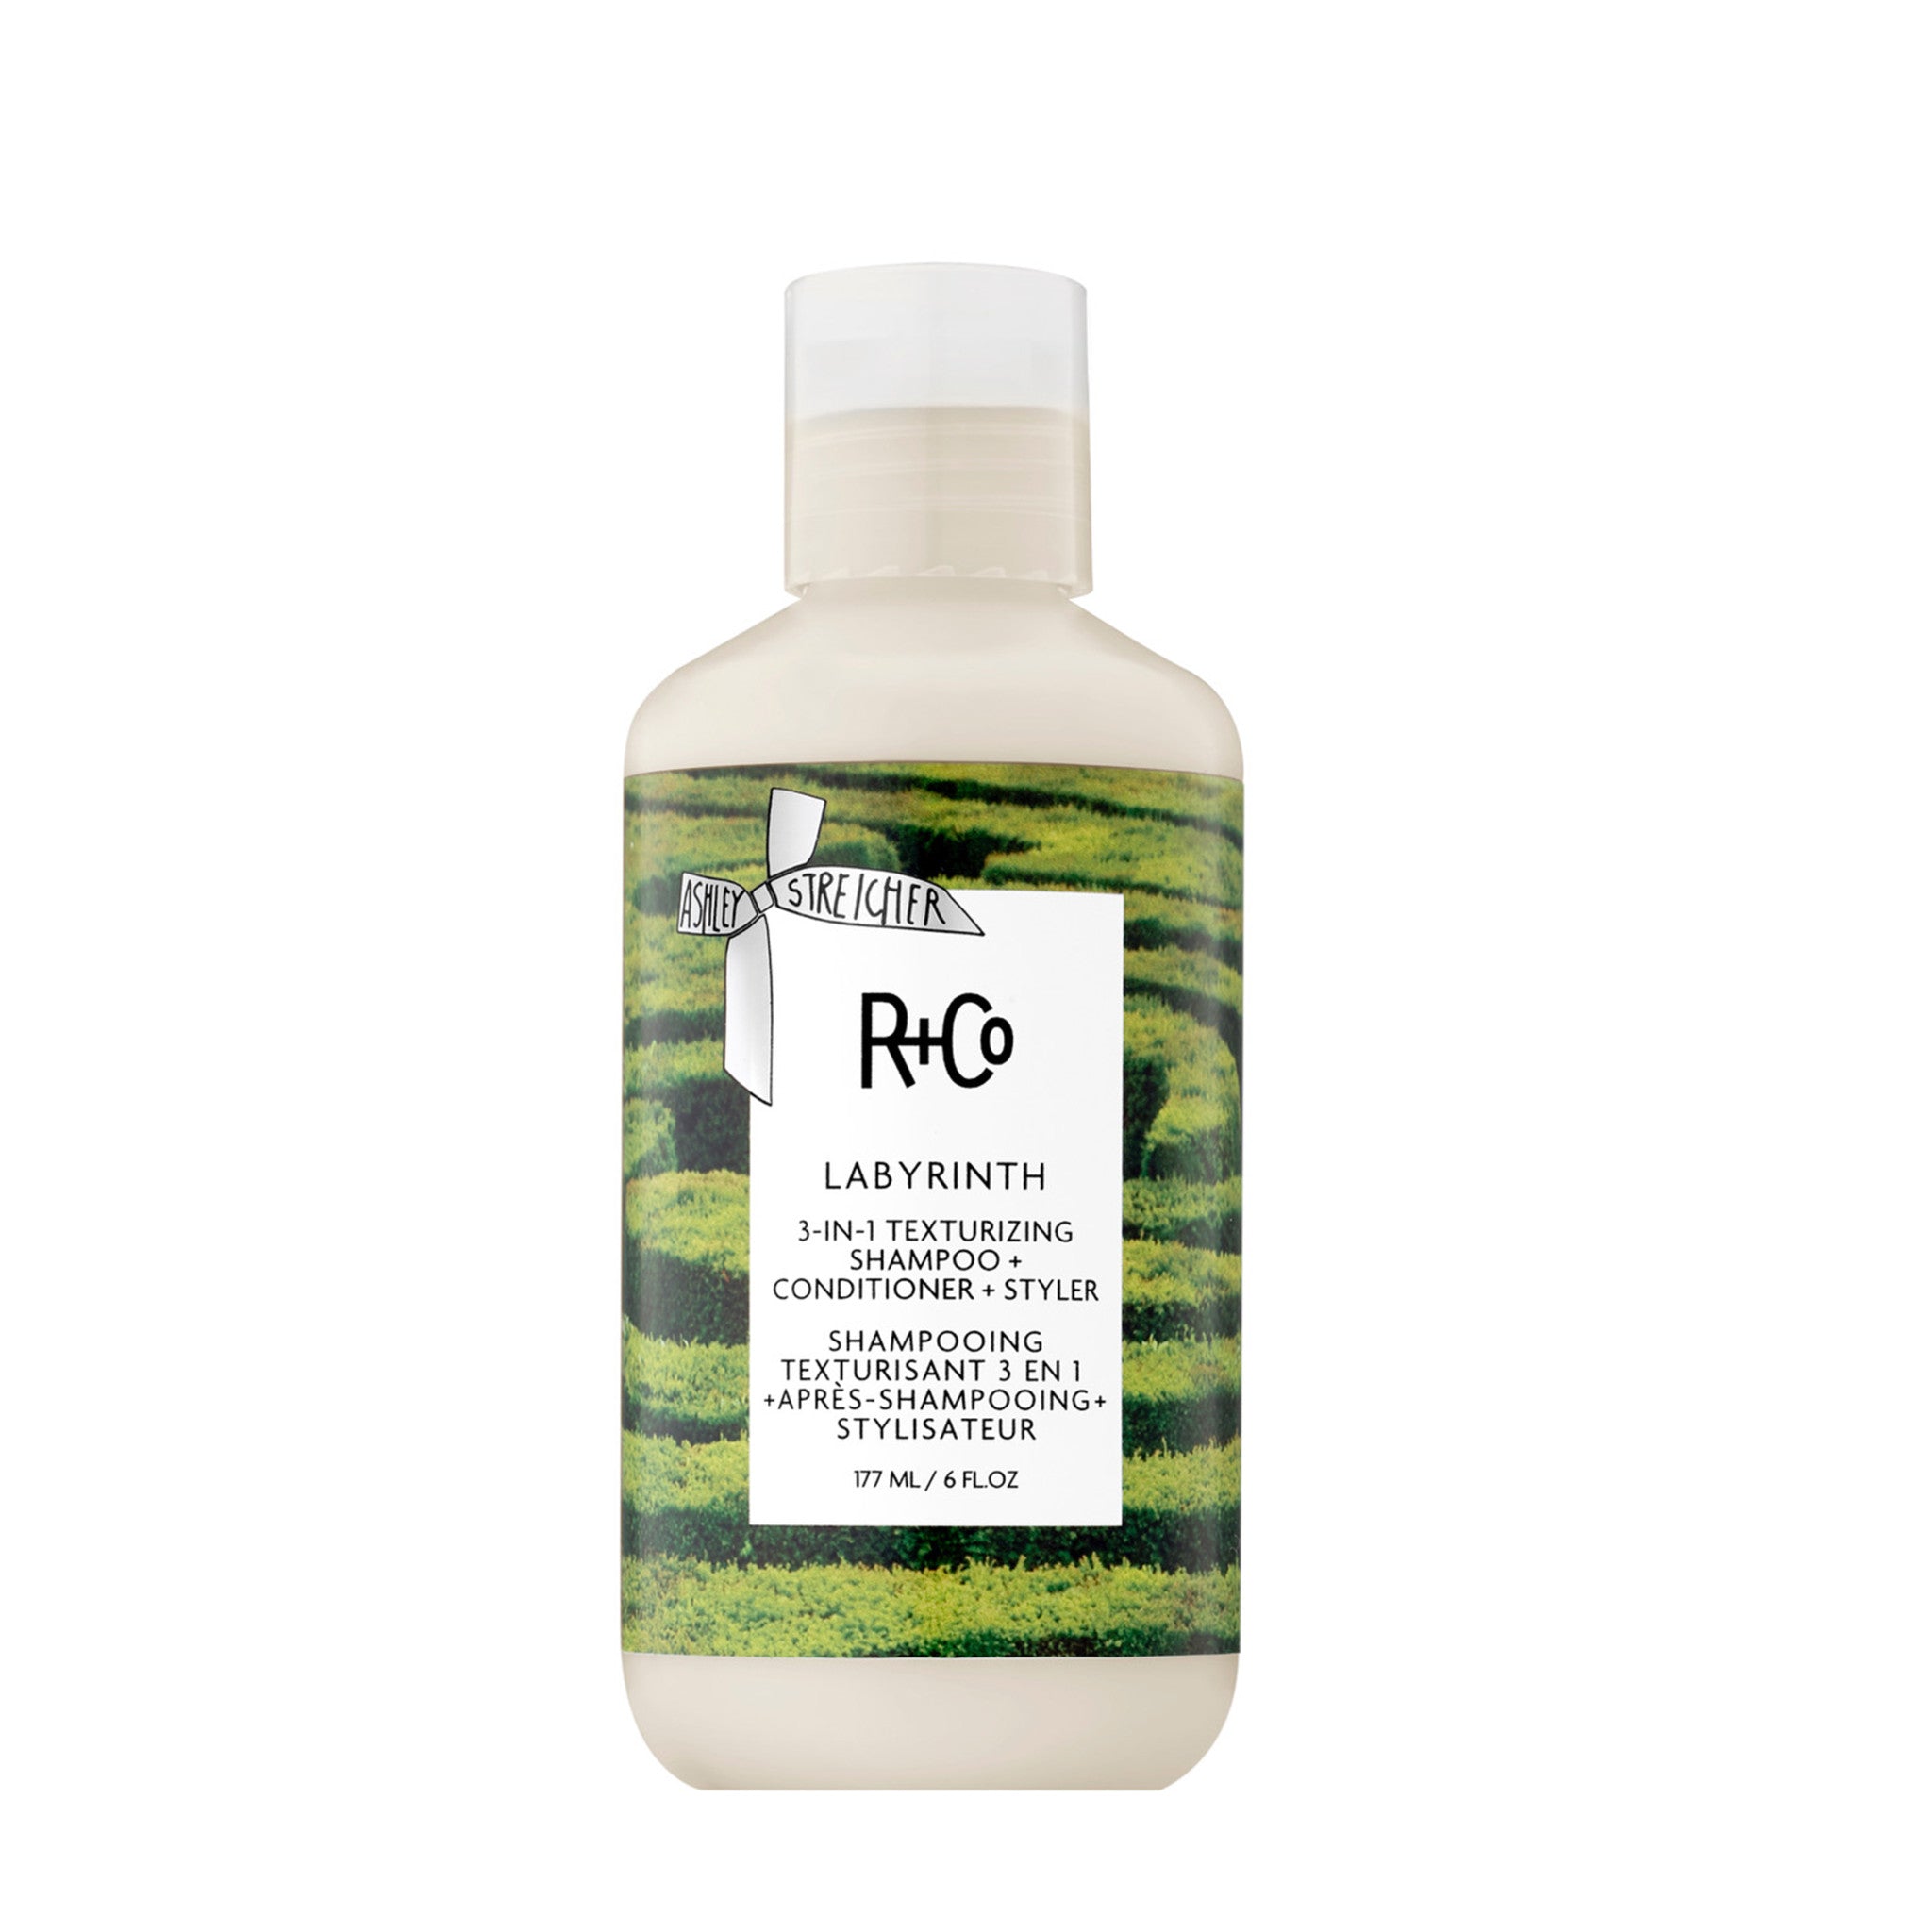 R+Co Labyrinth 3-in-1 Texturizing Shampoo and Conditioner and Styler main image.